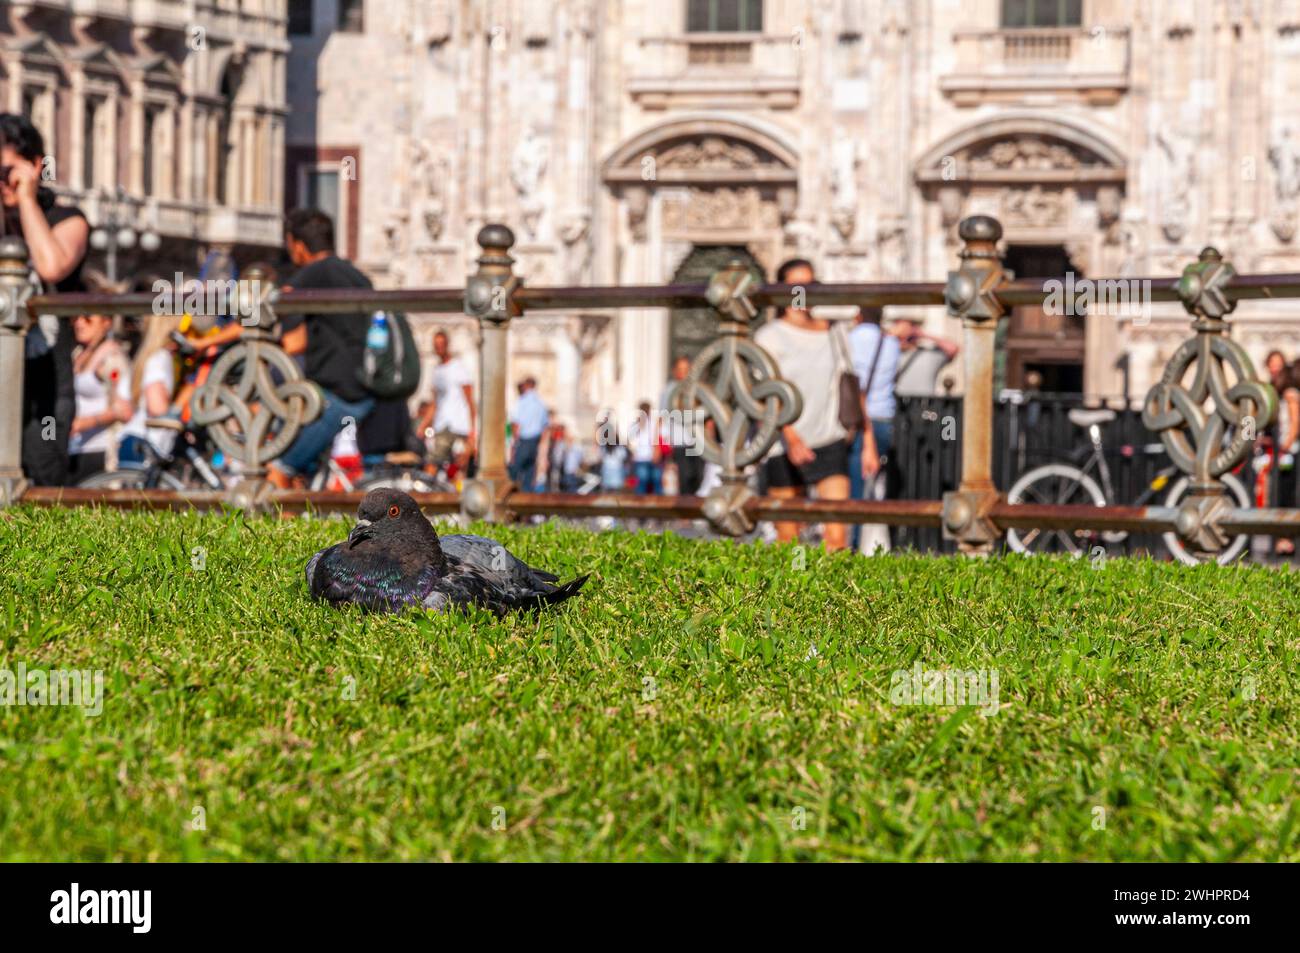 Pigeon crouching on the lawn in a tourist town square Stock Photo